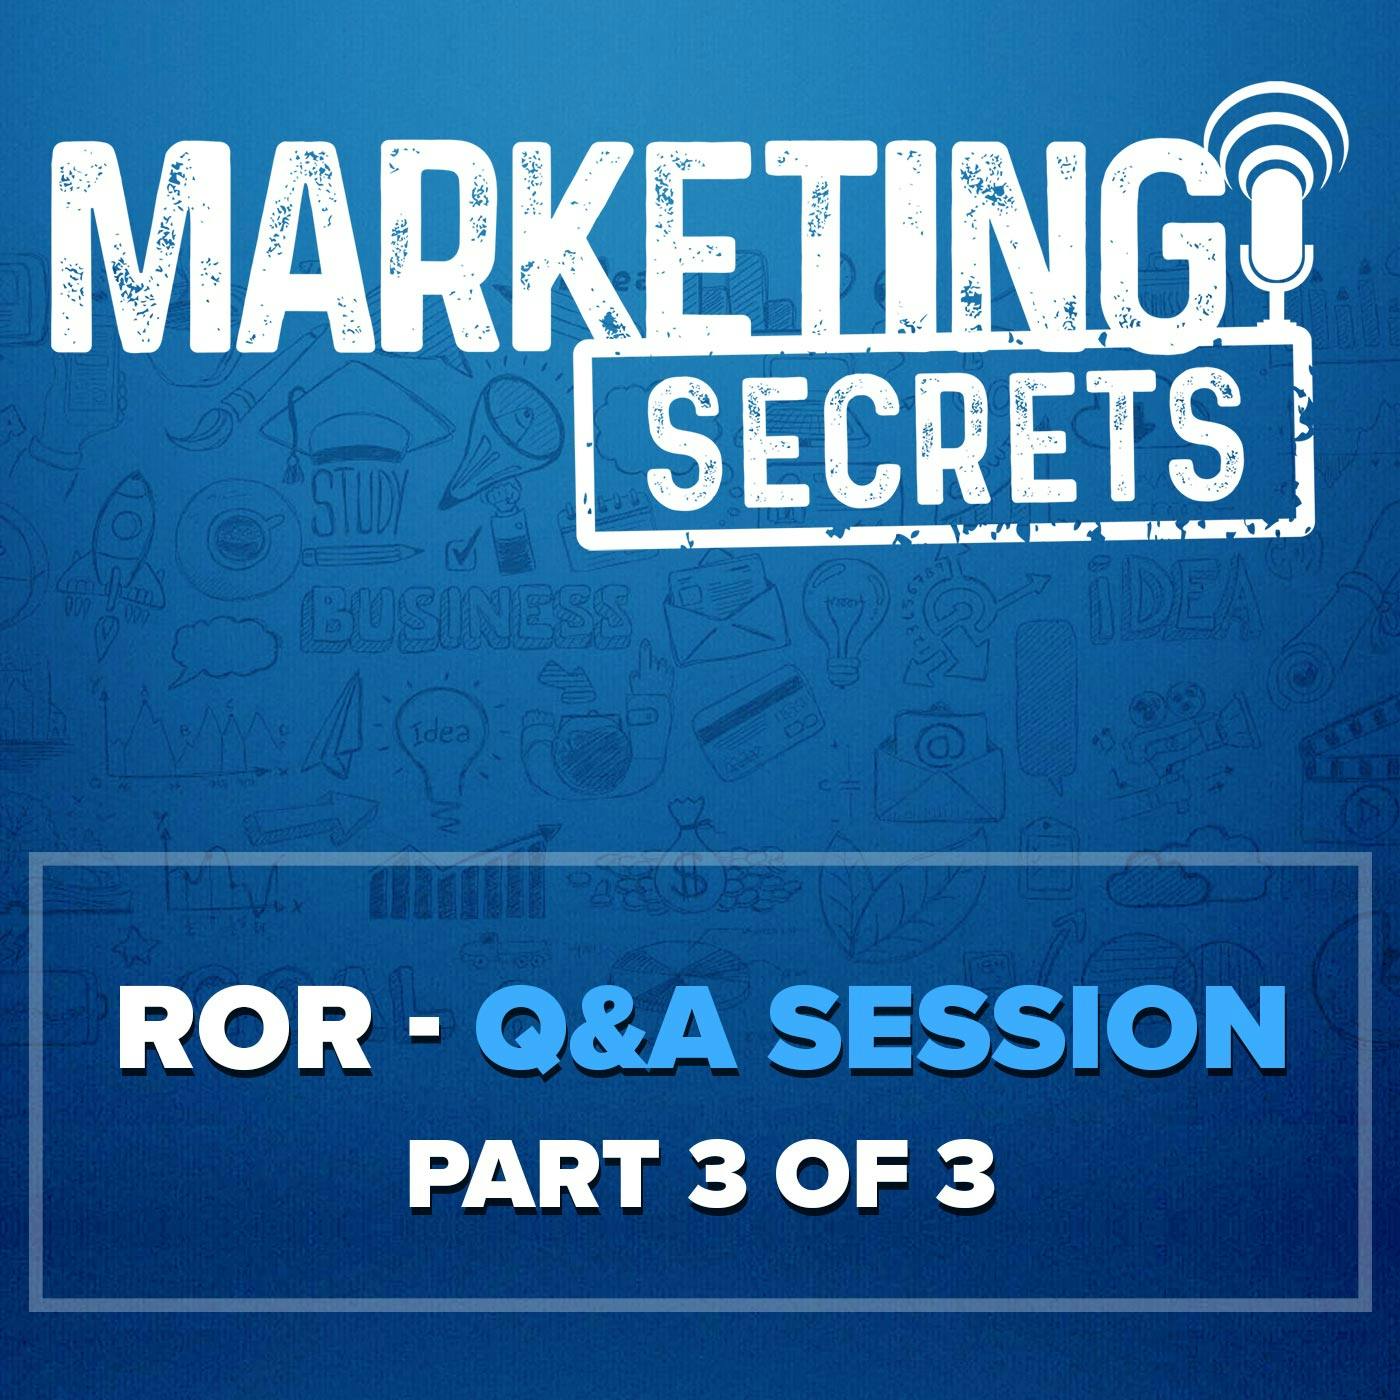 ROR - Q&A Session (3 of 3)